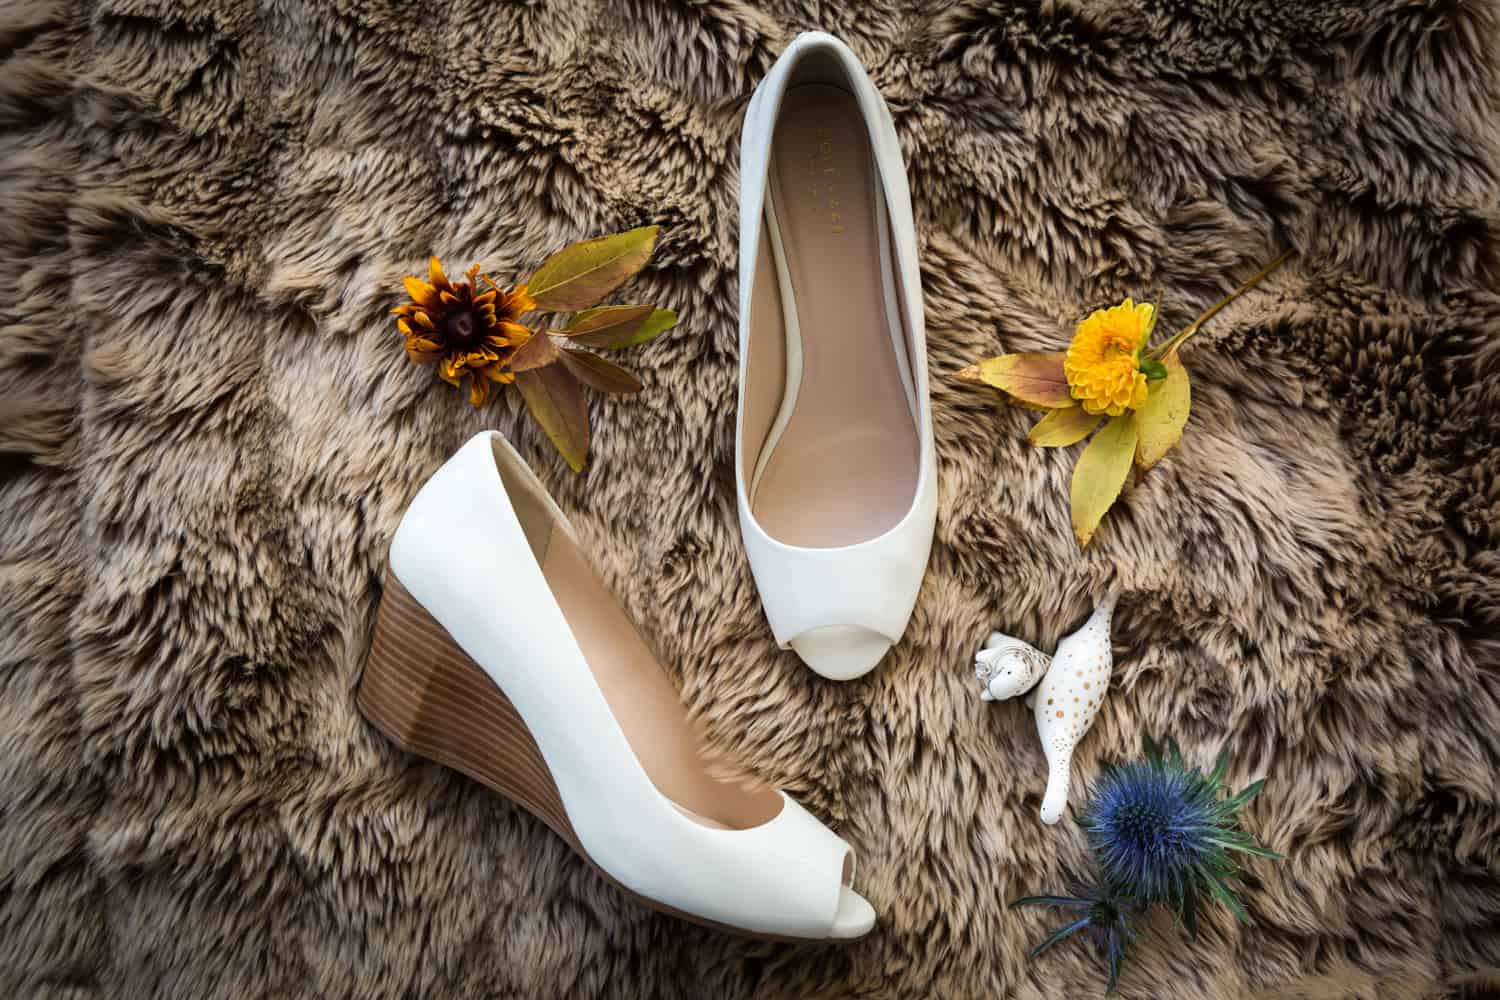 Bride's white wedge heels flowers and jewelry on furry rug